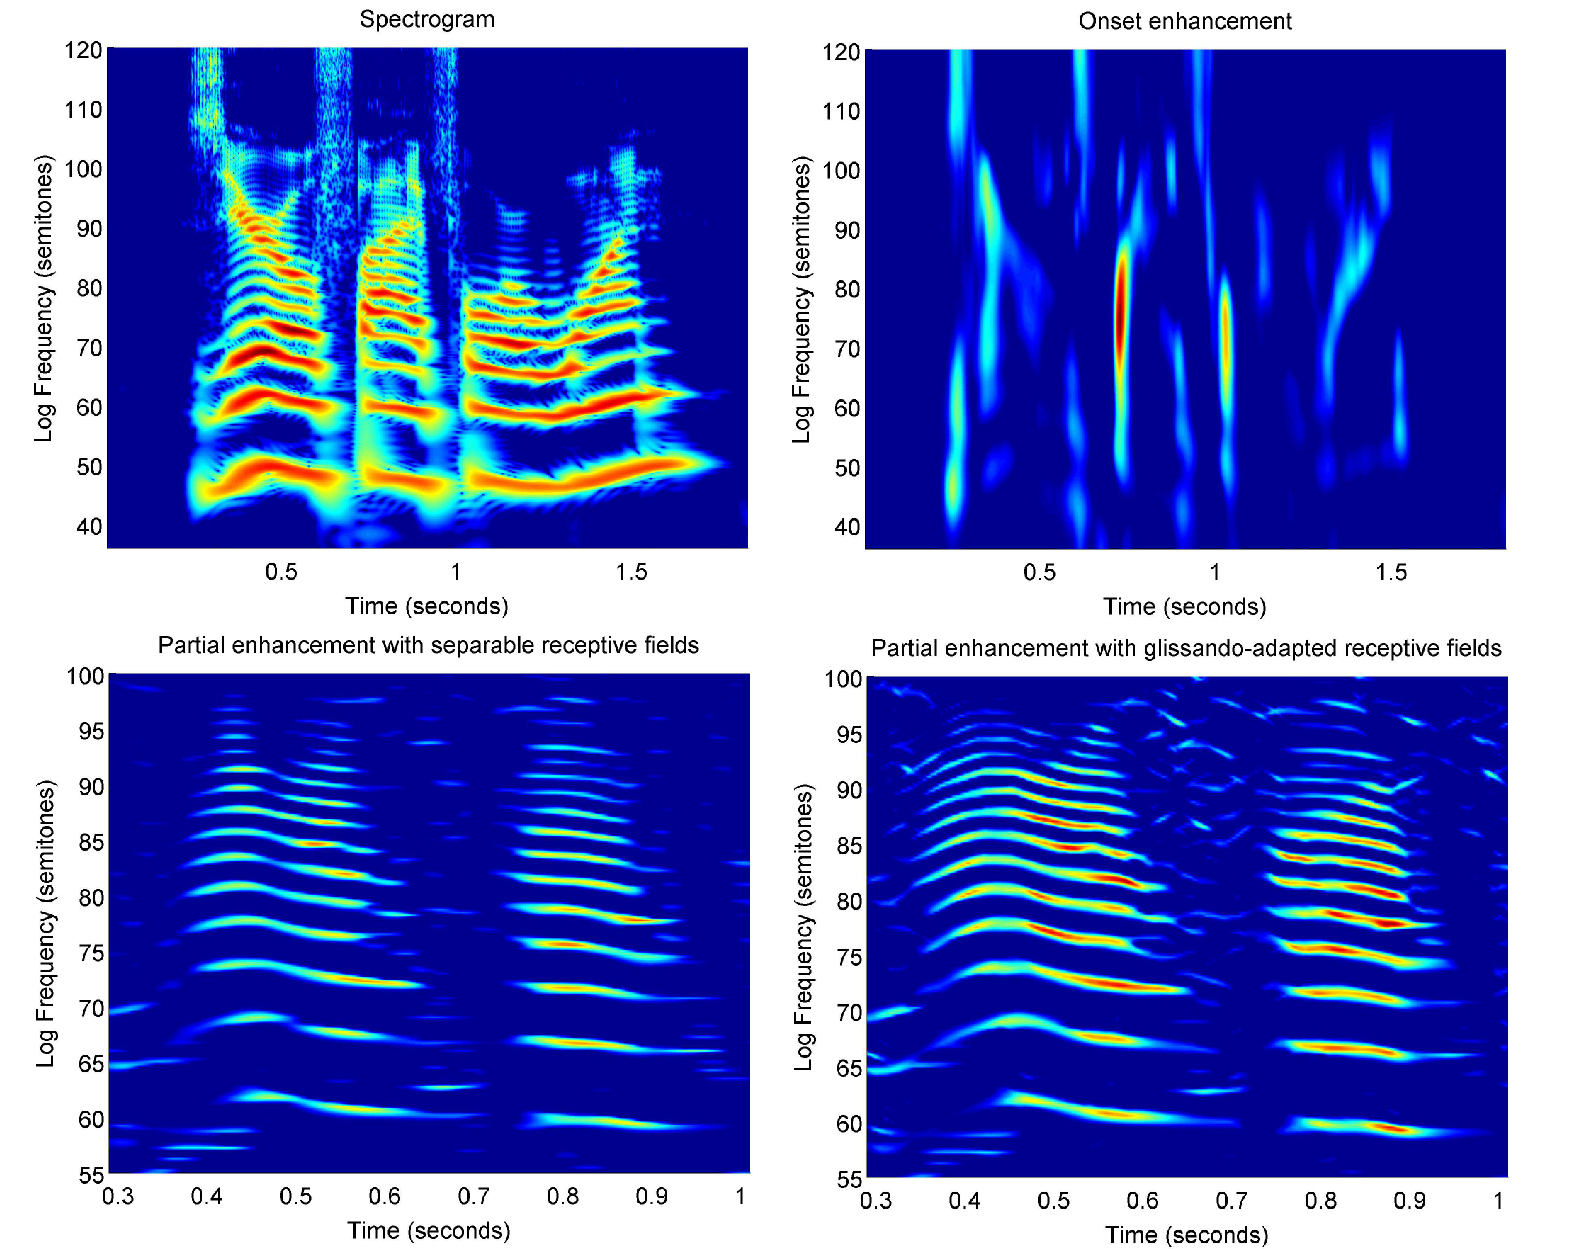 Figure 1 from Lindeberg and Friberg (2015) 'Scale-space theory for auditory signals', SSVM 2015: Scale-Space and Variational Methods in Computer Vision, Springer LNCS 9087:3-15.